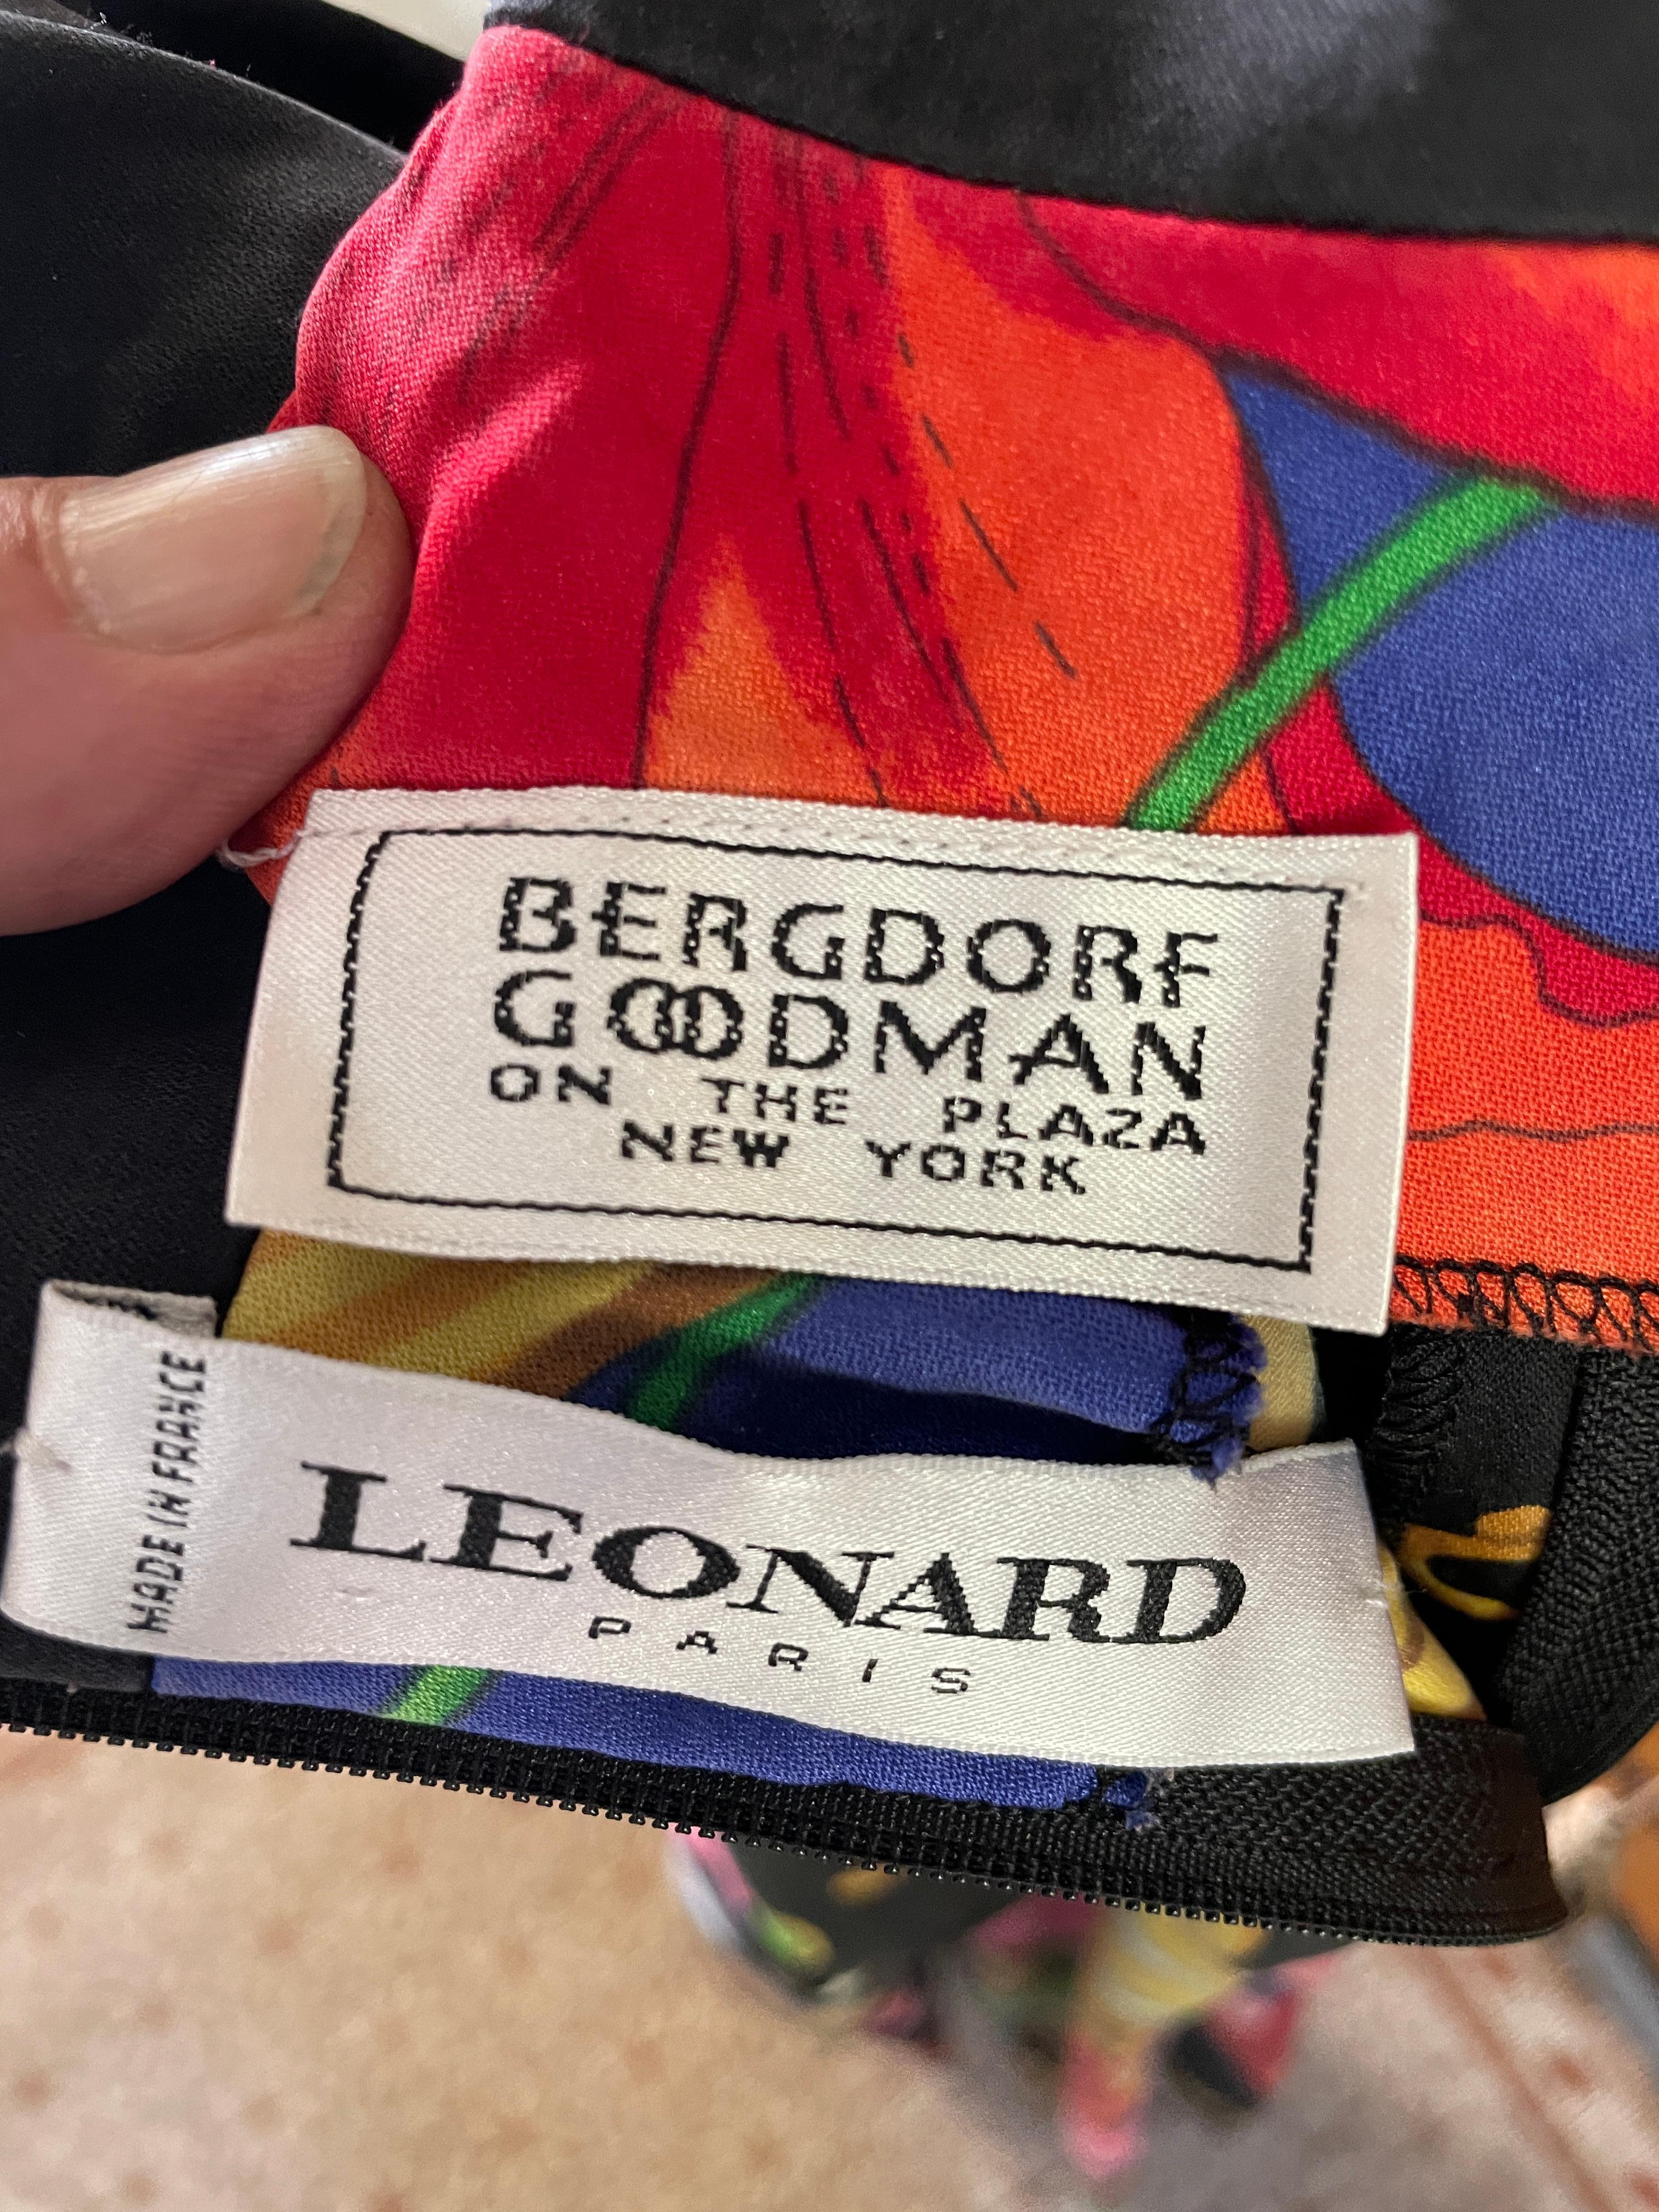 Leonard Paris Vintage 80's Long Sleeve Silk Jersey Dress from Bergdorf Goodman
So pretty, please use the zoom lens to see details.

Leonard Paris was a contemporary of Pucci, both houses creating brilliant 60's patterns on silk jersey.
Both were